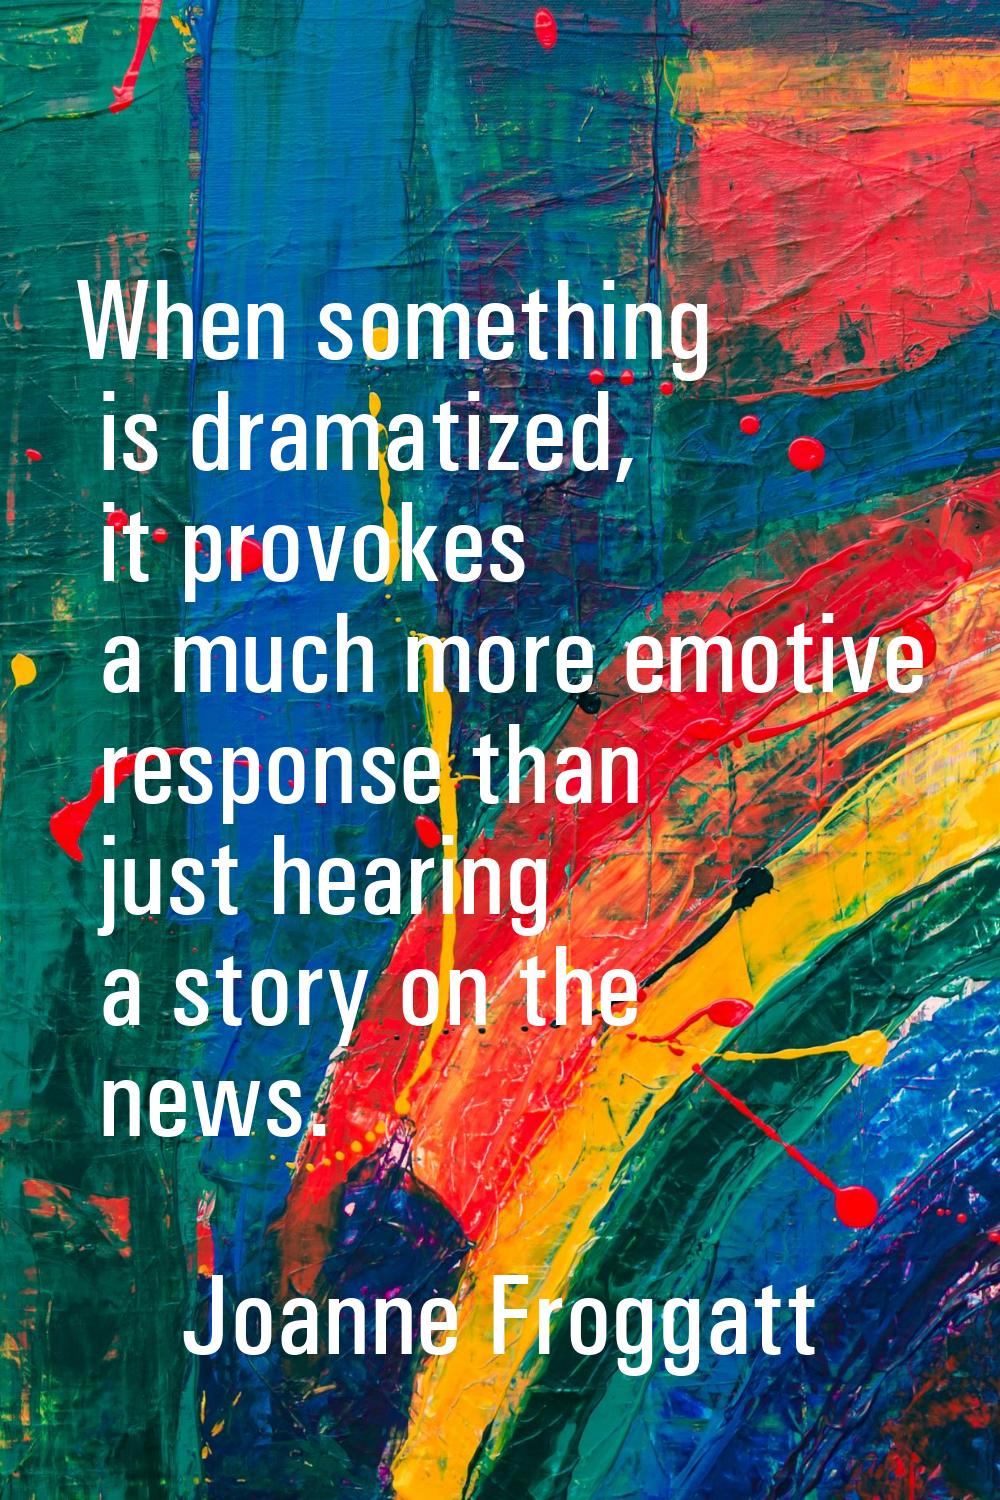 When something is dramatized, it provokes a much more emotive response than just hearing a story on